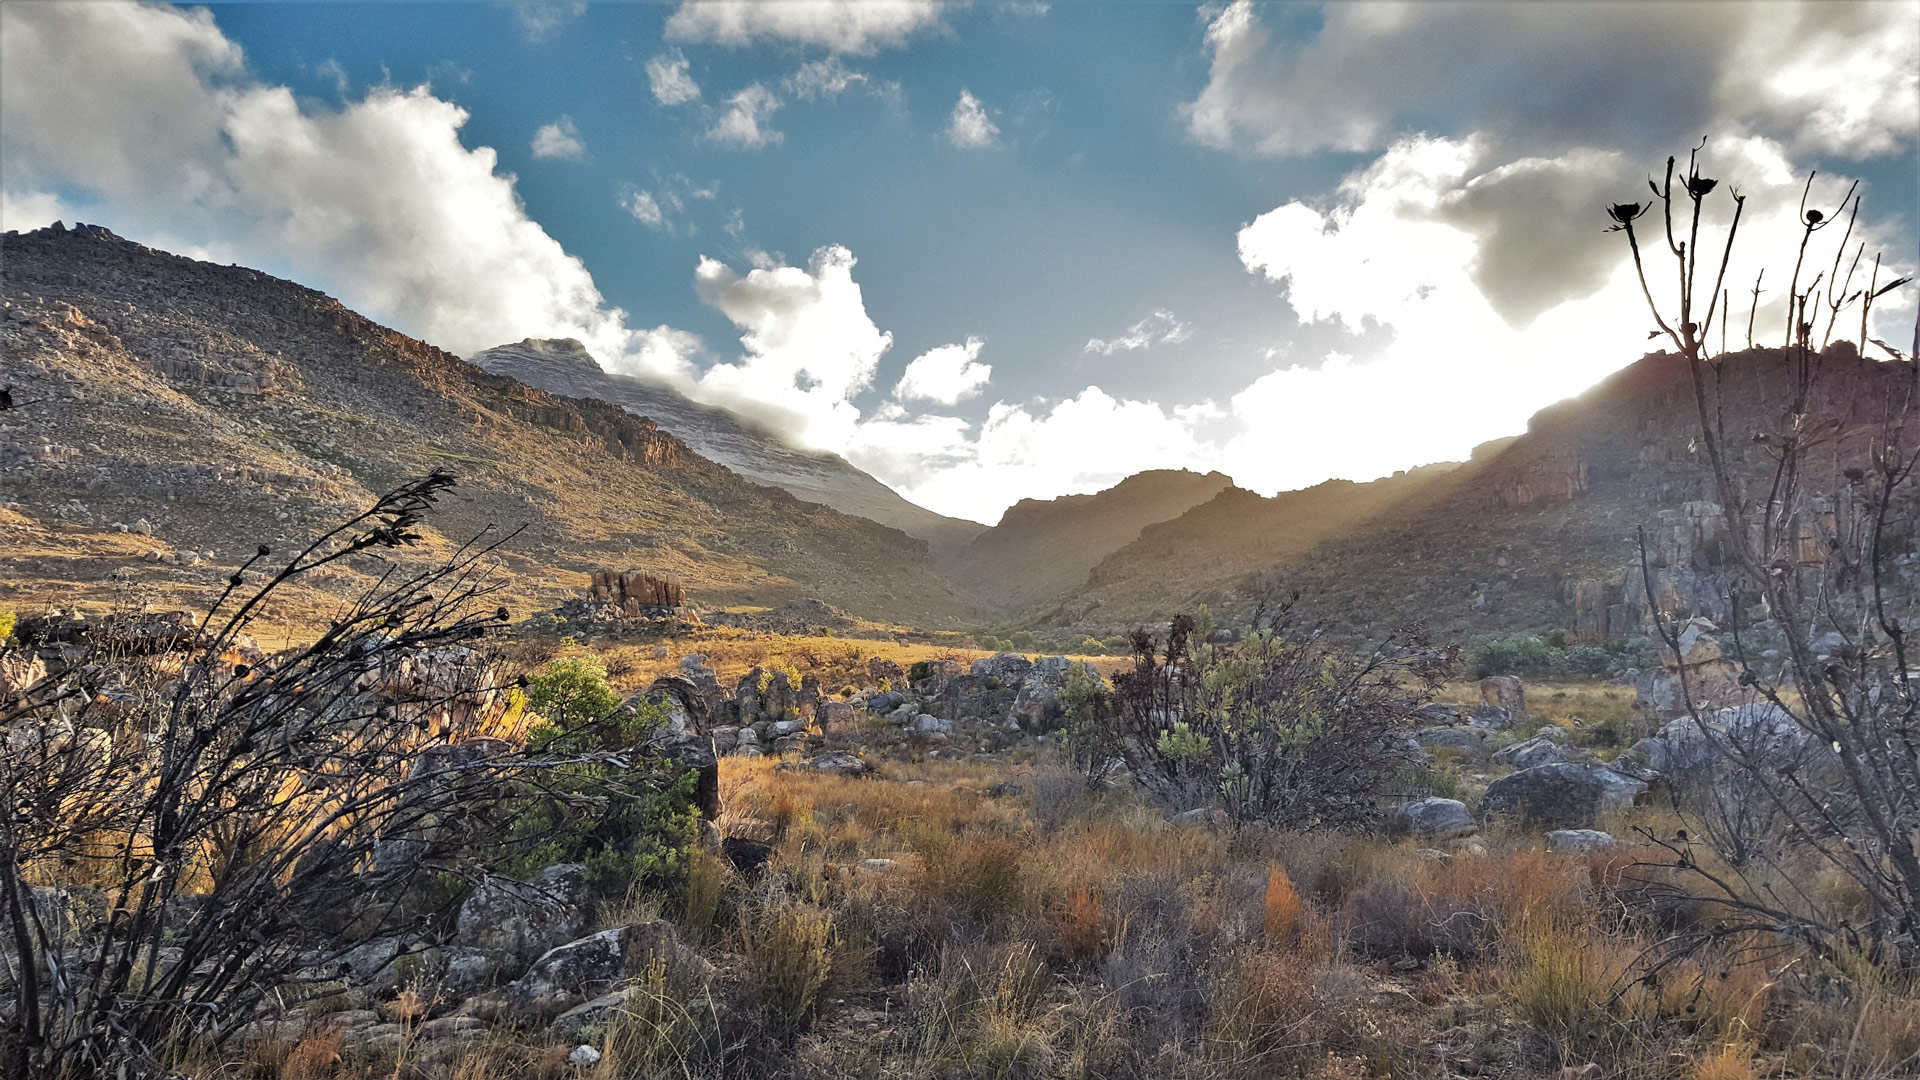 A fantastic view from the Maltese Cross parking area in the Cederberg